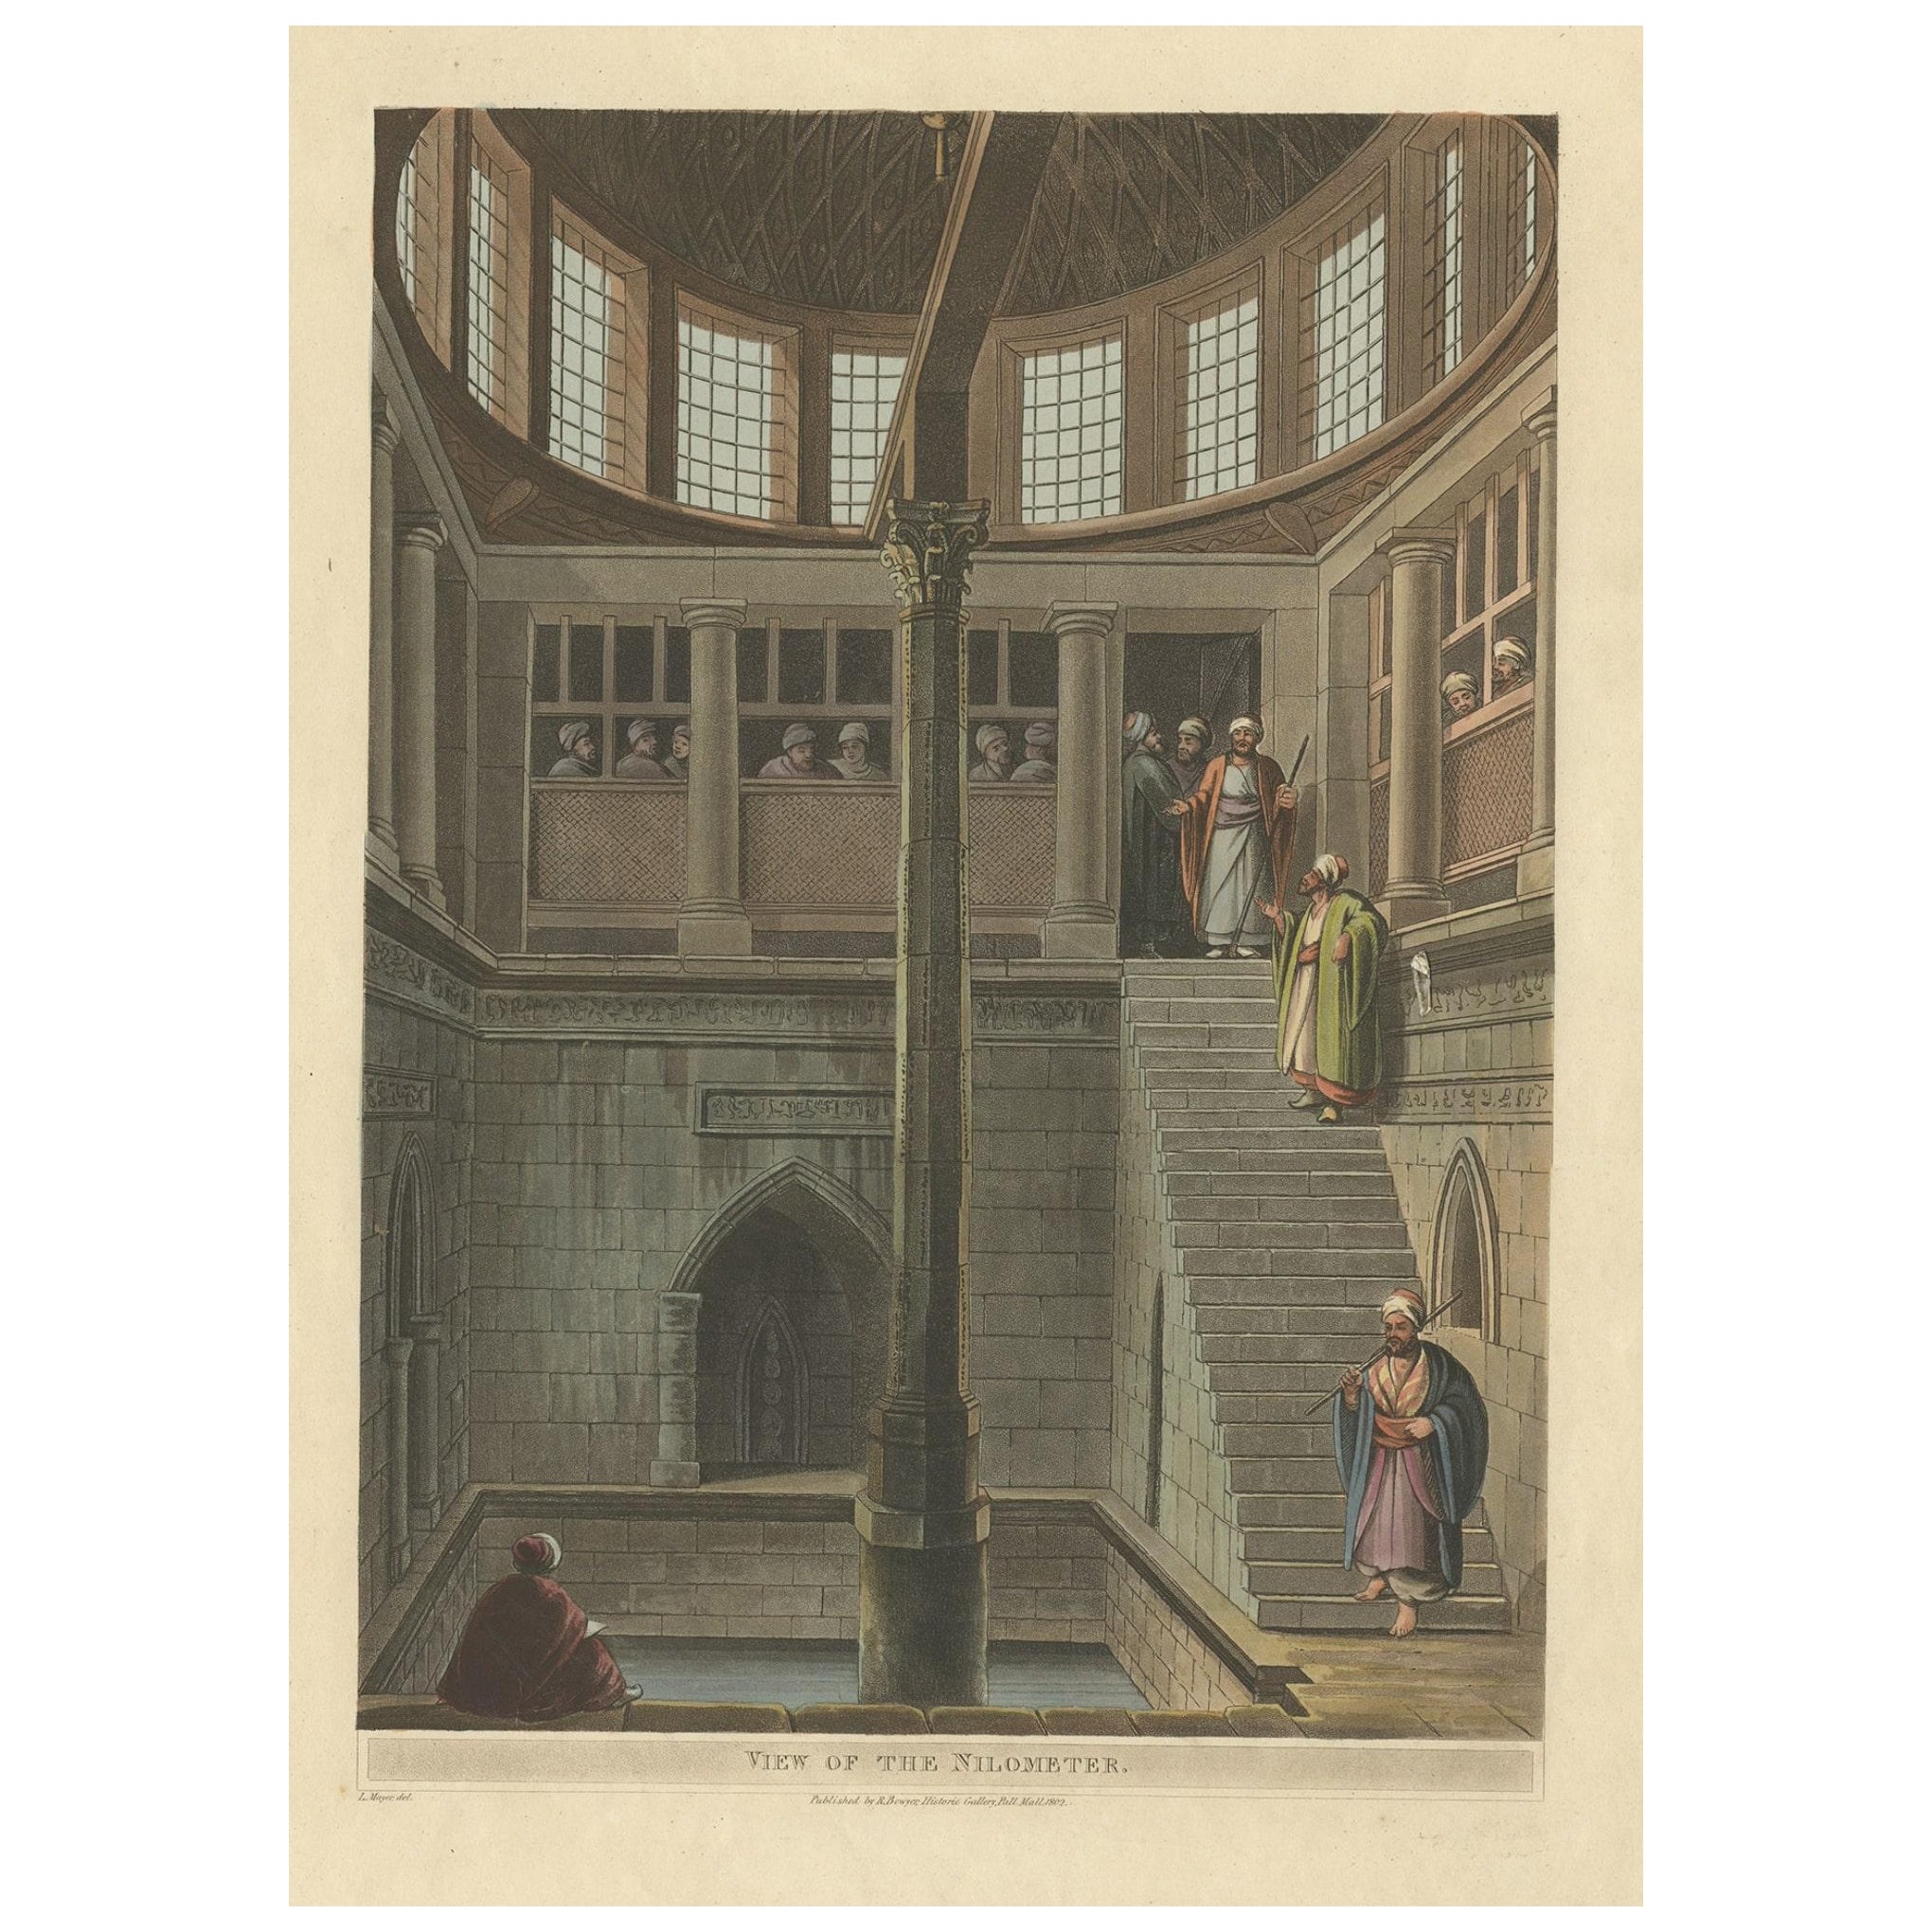 Rare Print of a Nilometer, a Structure Used to Calculate Taxes in Egypt, 1802